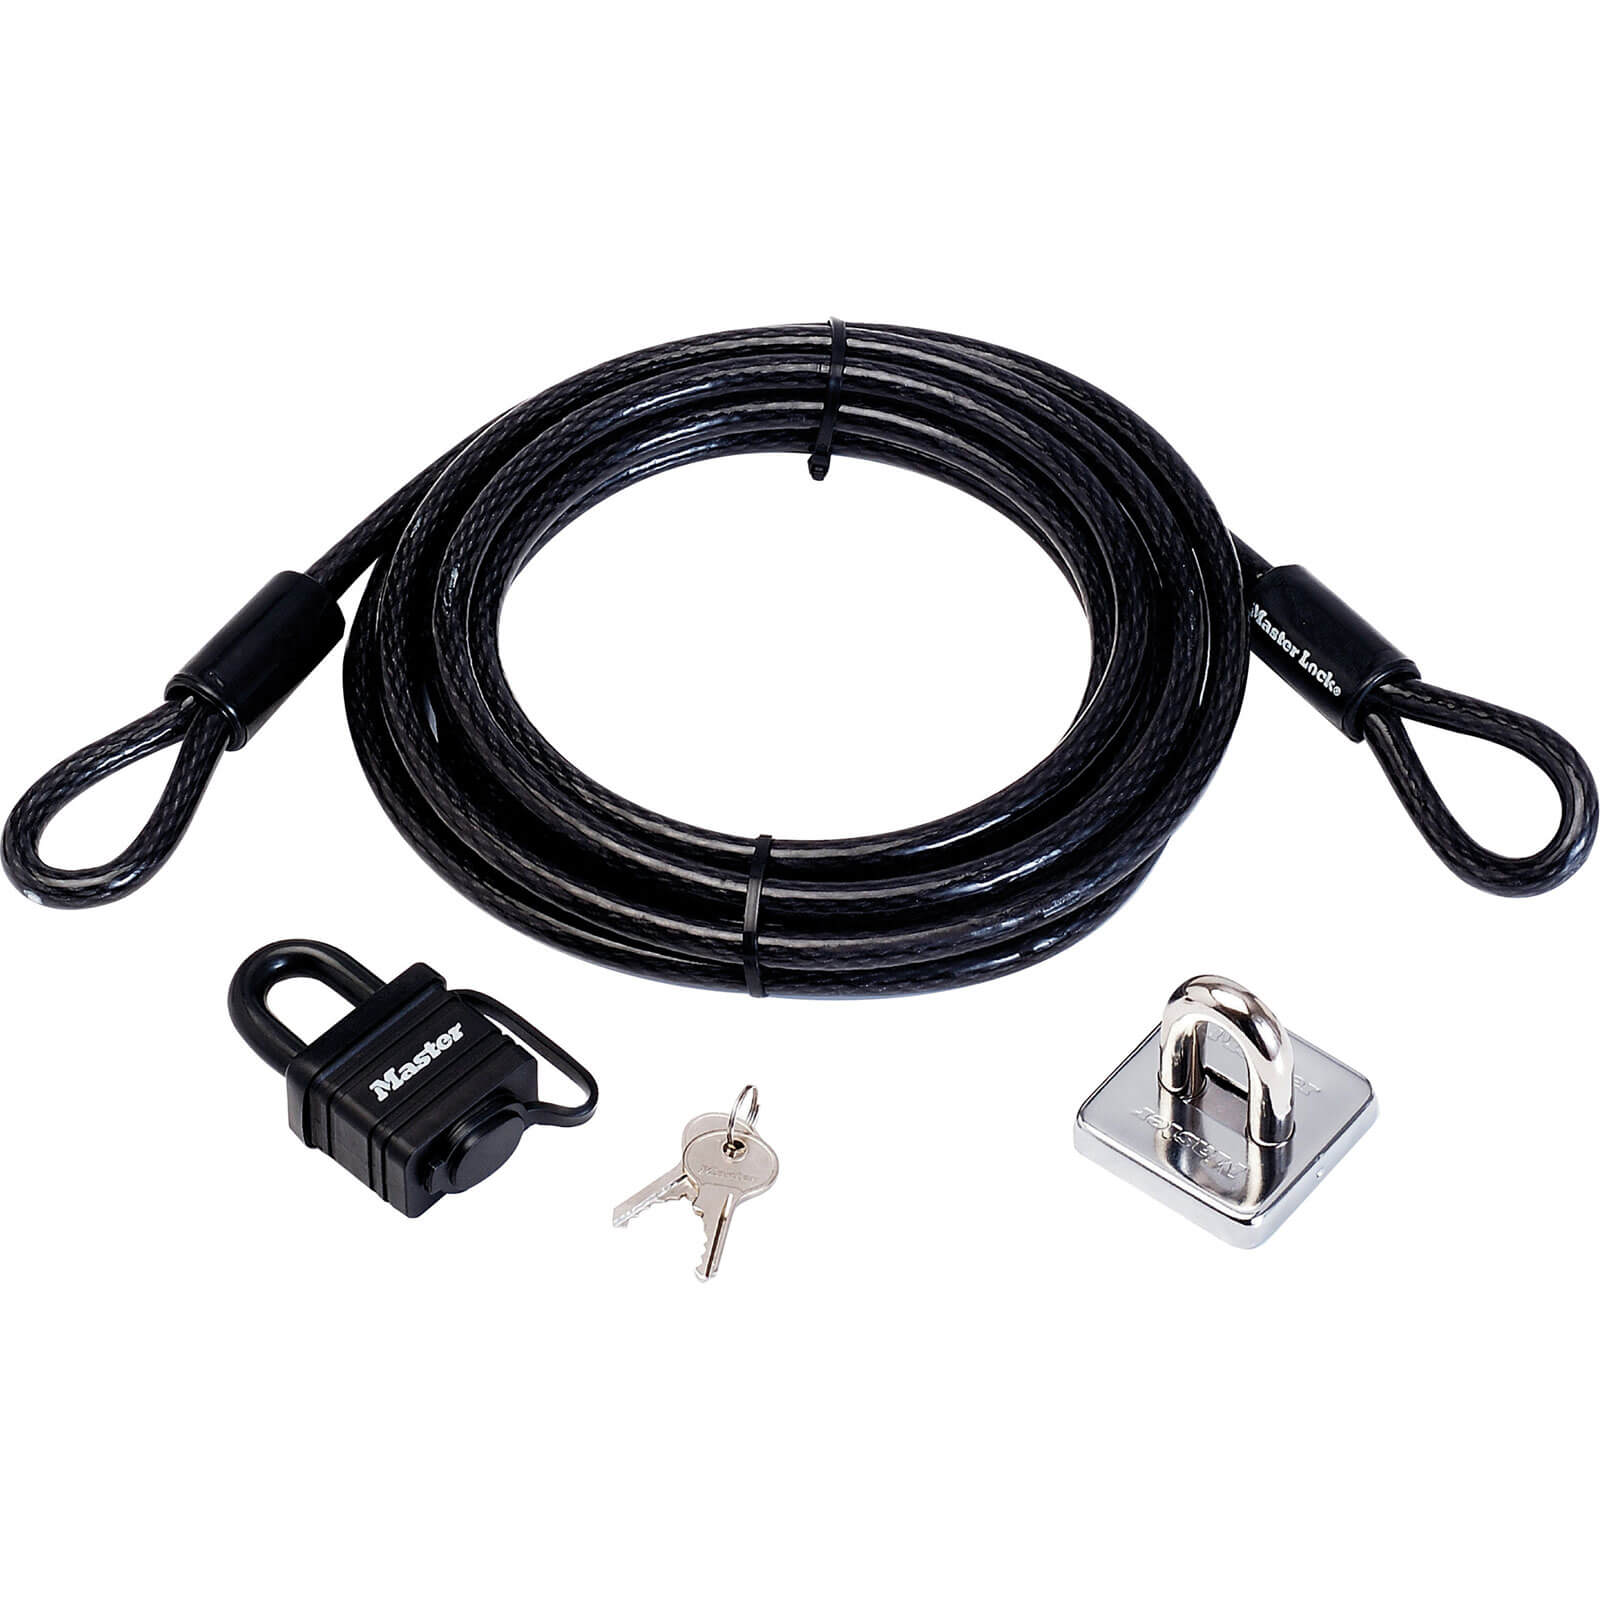 Photo of Masterlock Cable Lock And Anchor Garden Security Kit